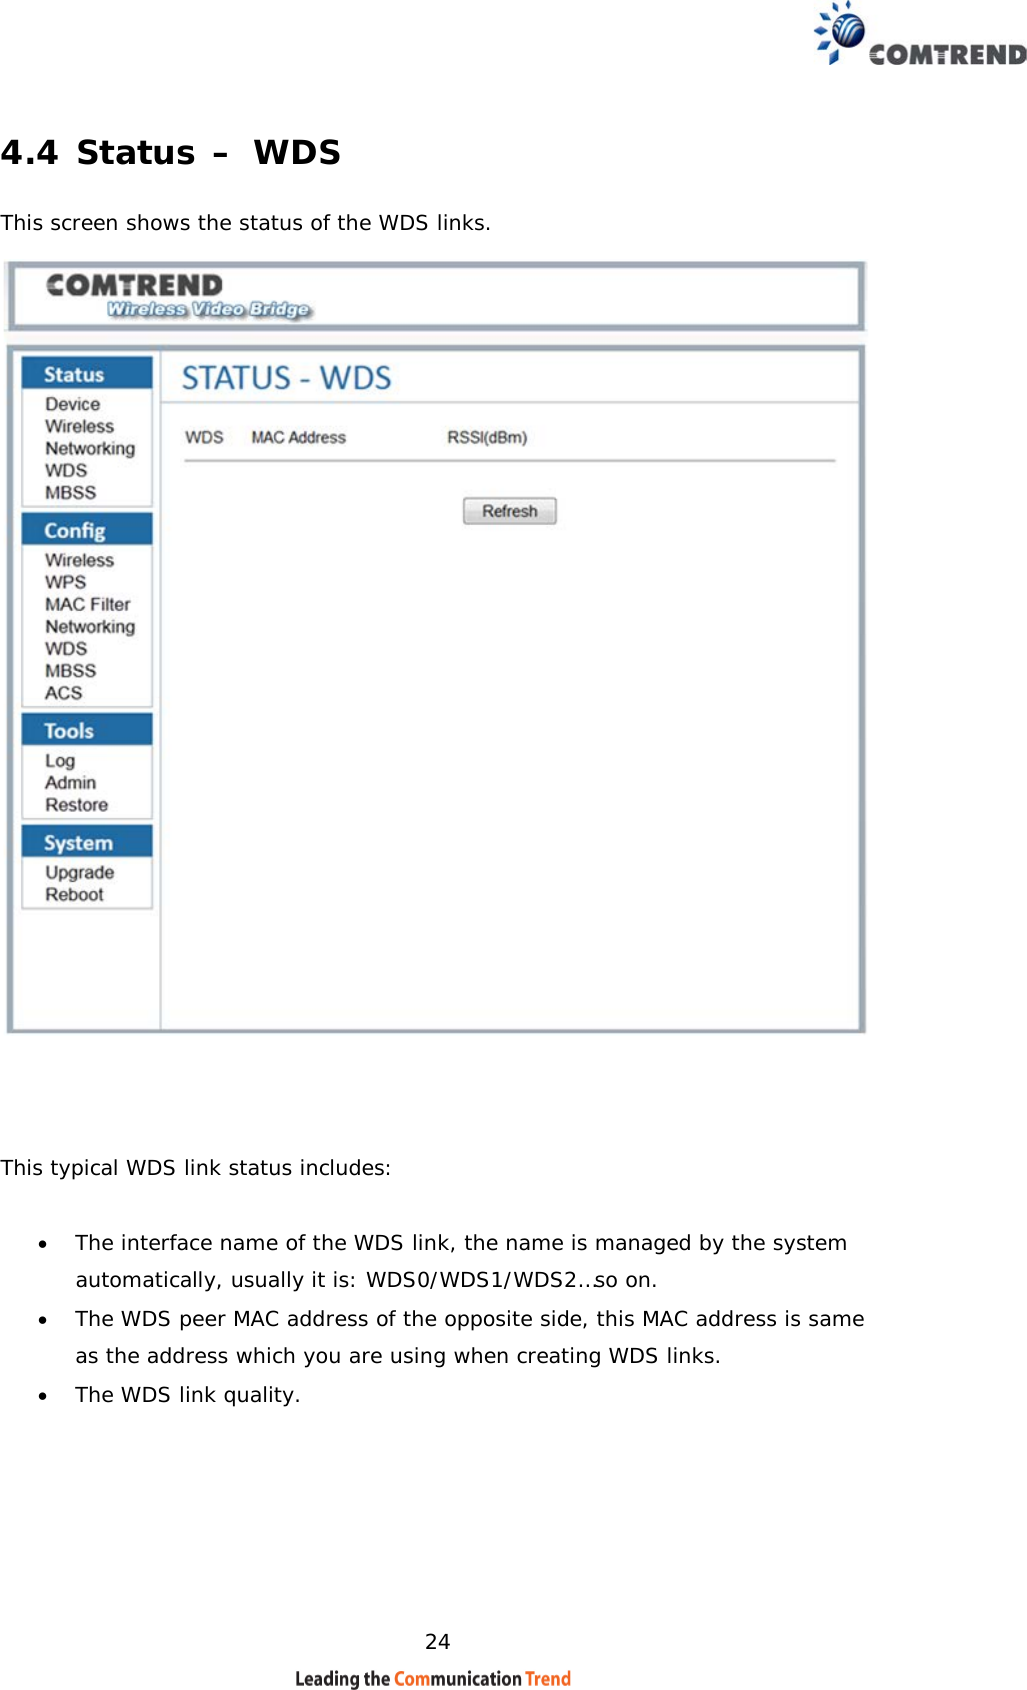    24 4.4 Status – WDS This screen shows the status of the WDS links.       This typical WDS link status includes:   • The interface name of the WDS link, the name is managed by the system automatically, usually it is: WDS0/WDS1/WDS2…so on.  • The WDS peer MAC address of the opposite side, this MAC address is same as the address which you are using when creating WDS links.  • The WDS link quality.     